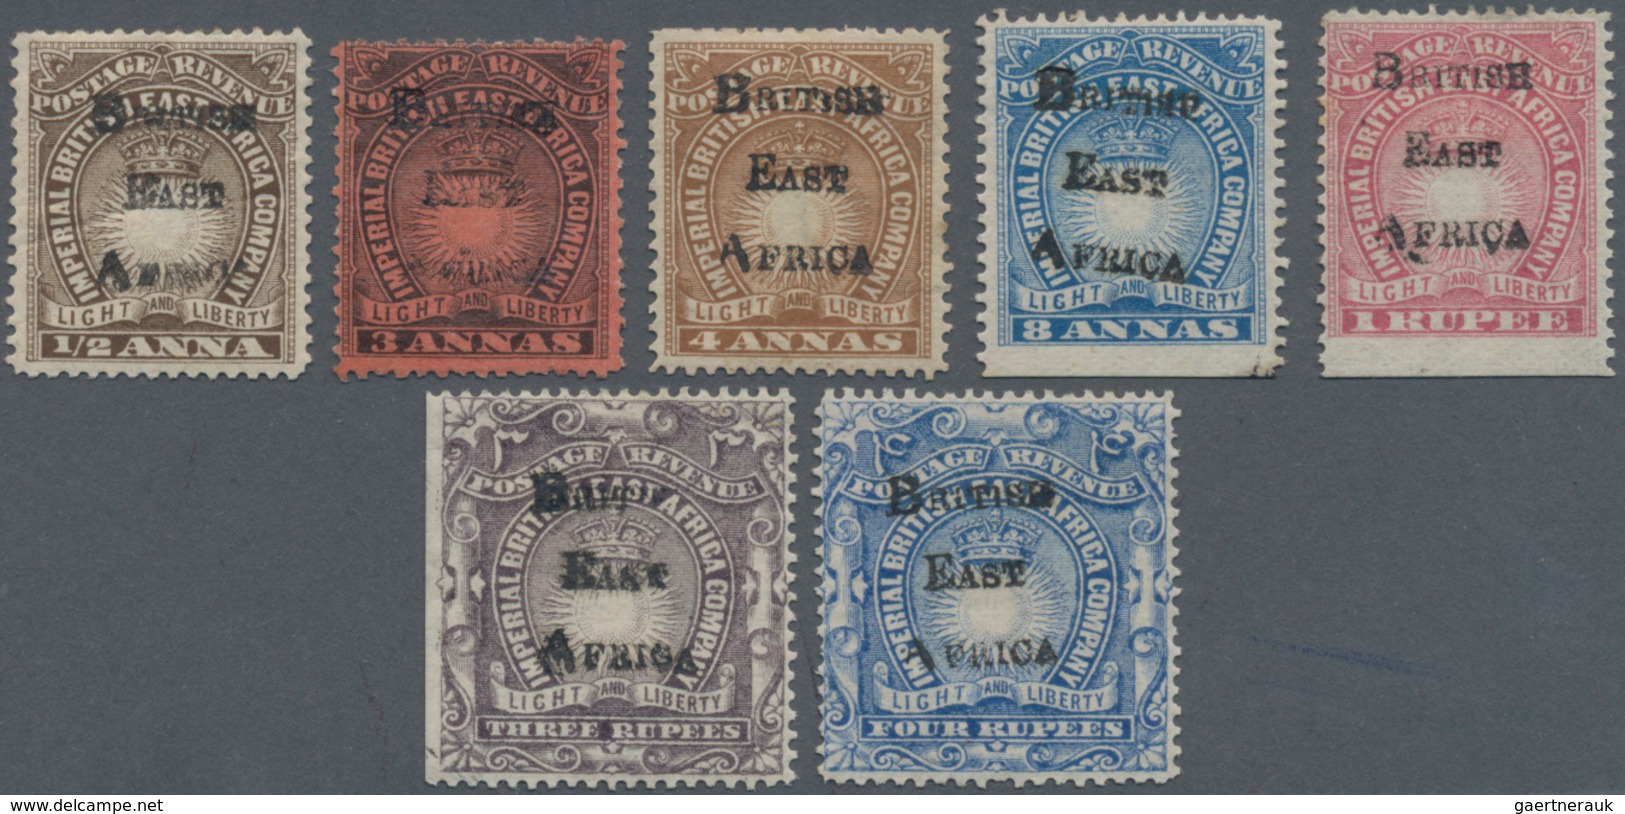 Kenia - Britisch Ostafrika: 1895, Stamps Of B.E.A. Company With Opt. 'BRITISH EAST AFRICA' Part Set - British East Africa